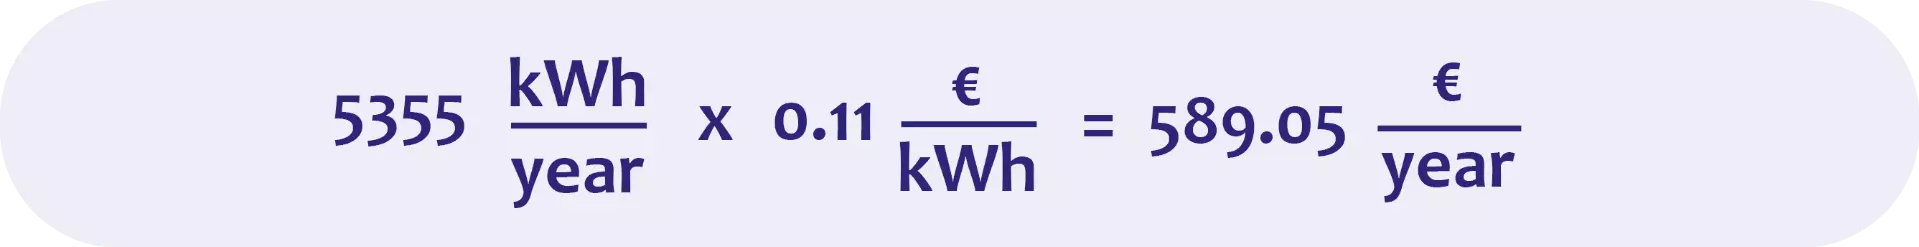 A lower energy consumption also results in lower electricity costs.